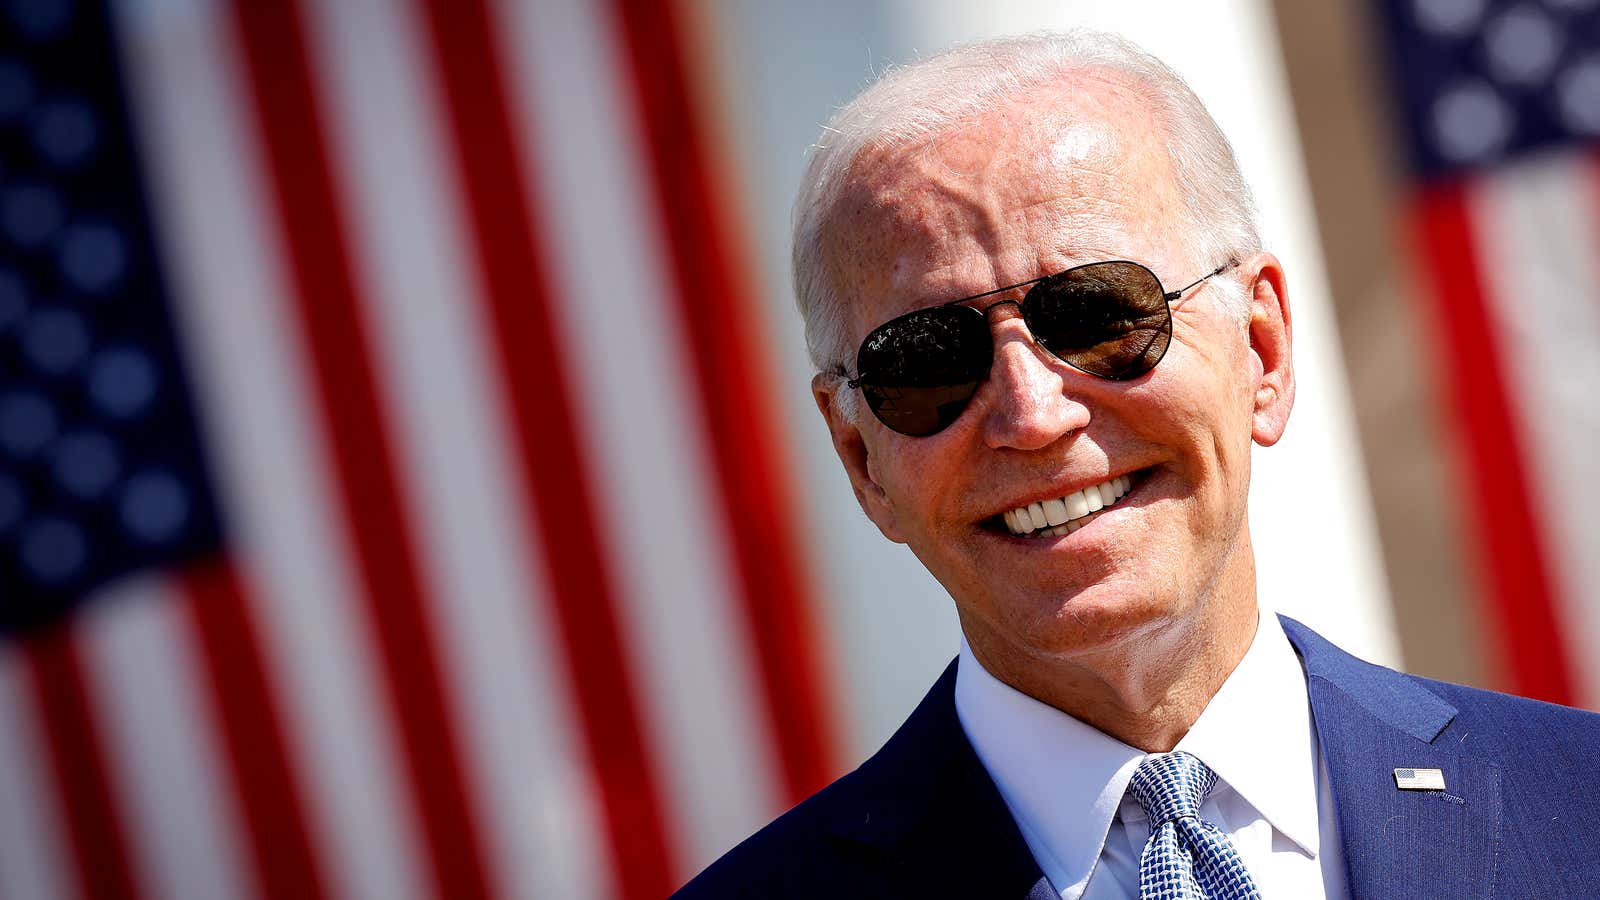 Joe Biden Deserves 4 More Years Of Making My Centrist Baby Boomer Pussy Sopping Wet